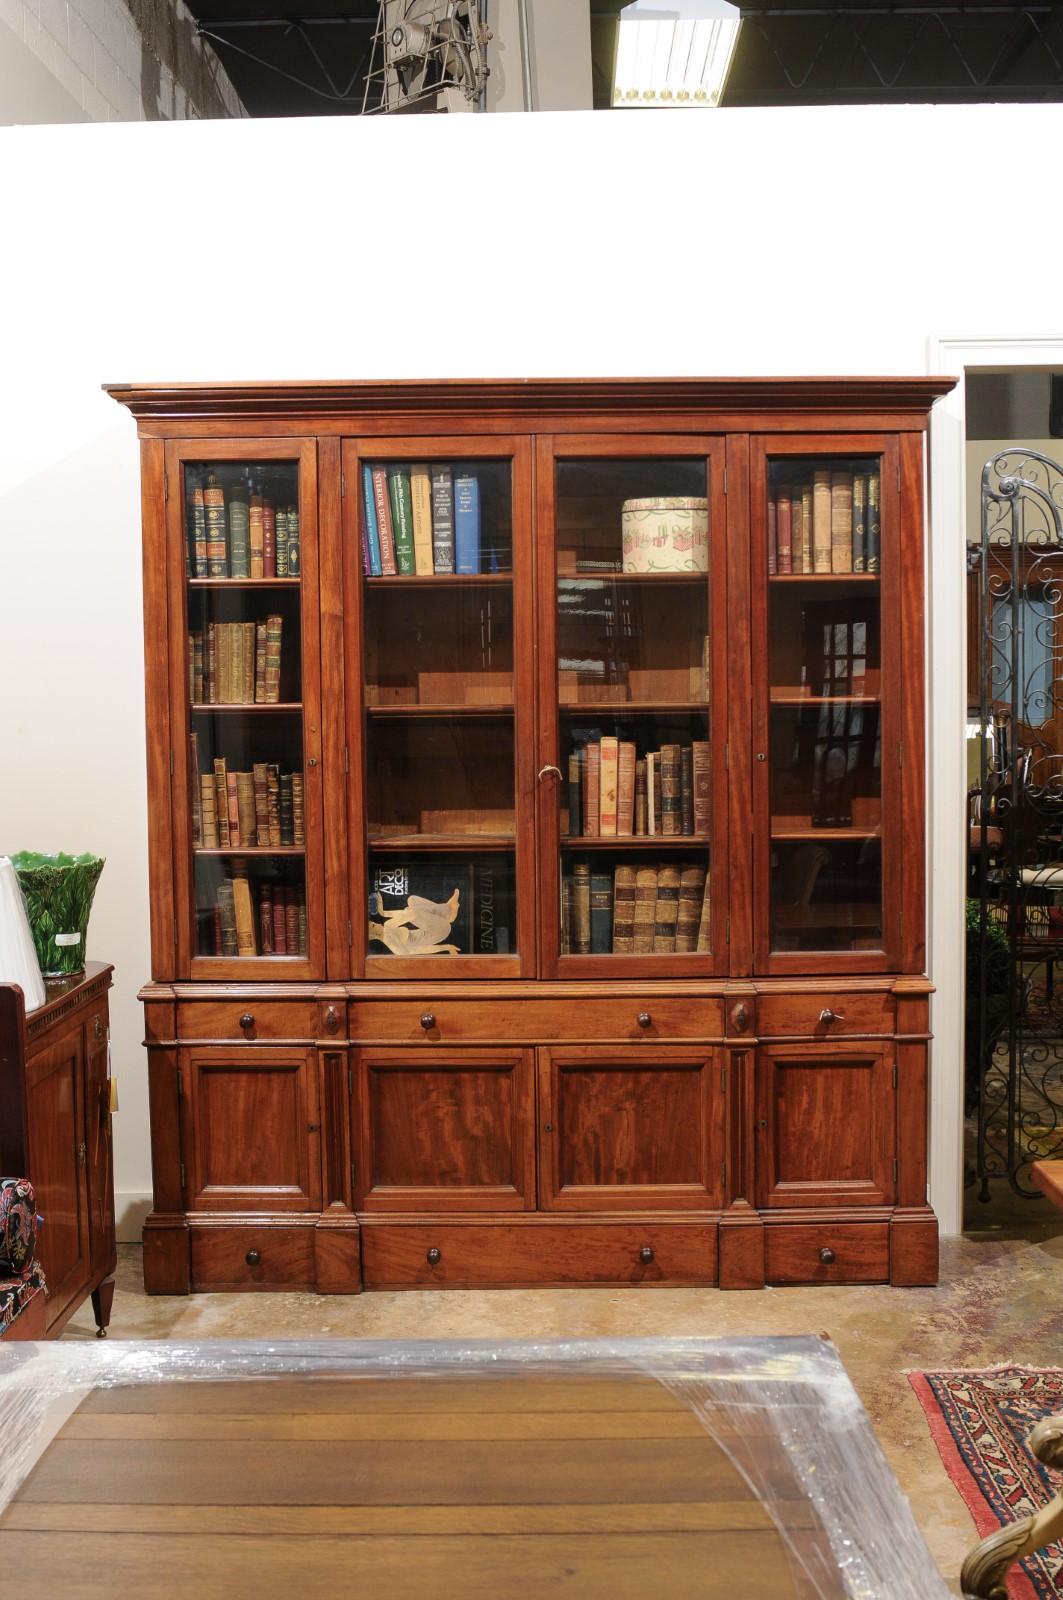 A Fine solid walnut bookcase with 4 glass doors that open to shelving
Below are 3 drawers (2 small on either side of 1 long}.
This sits on a cabinet with 4 raised panel doors. Above and below the doors are
2 short drawers on either side of a